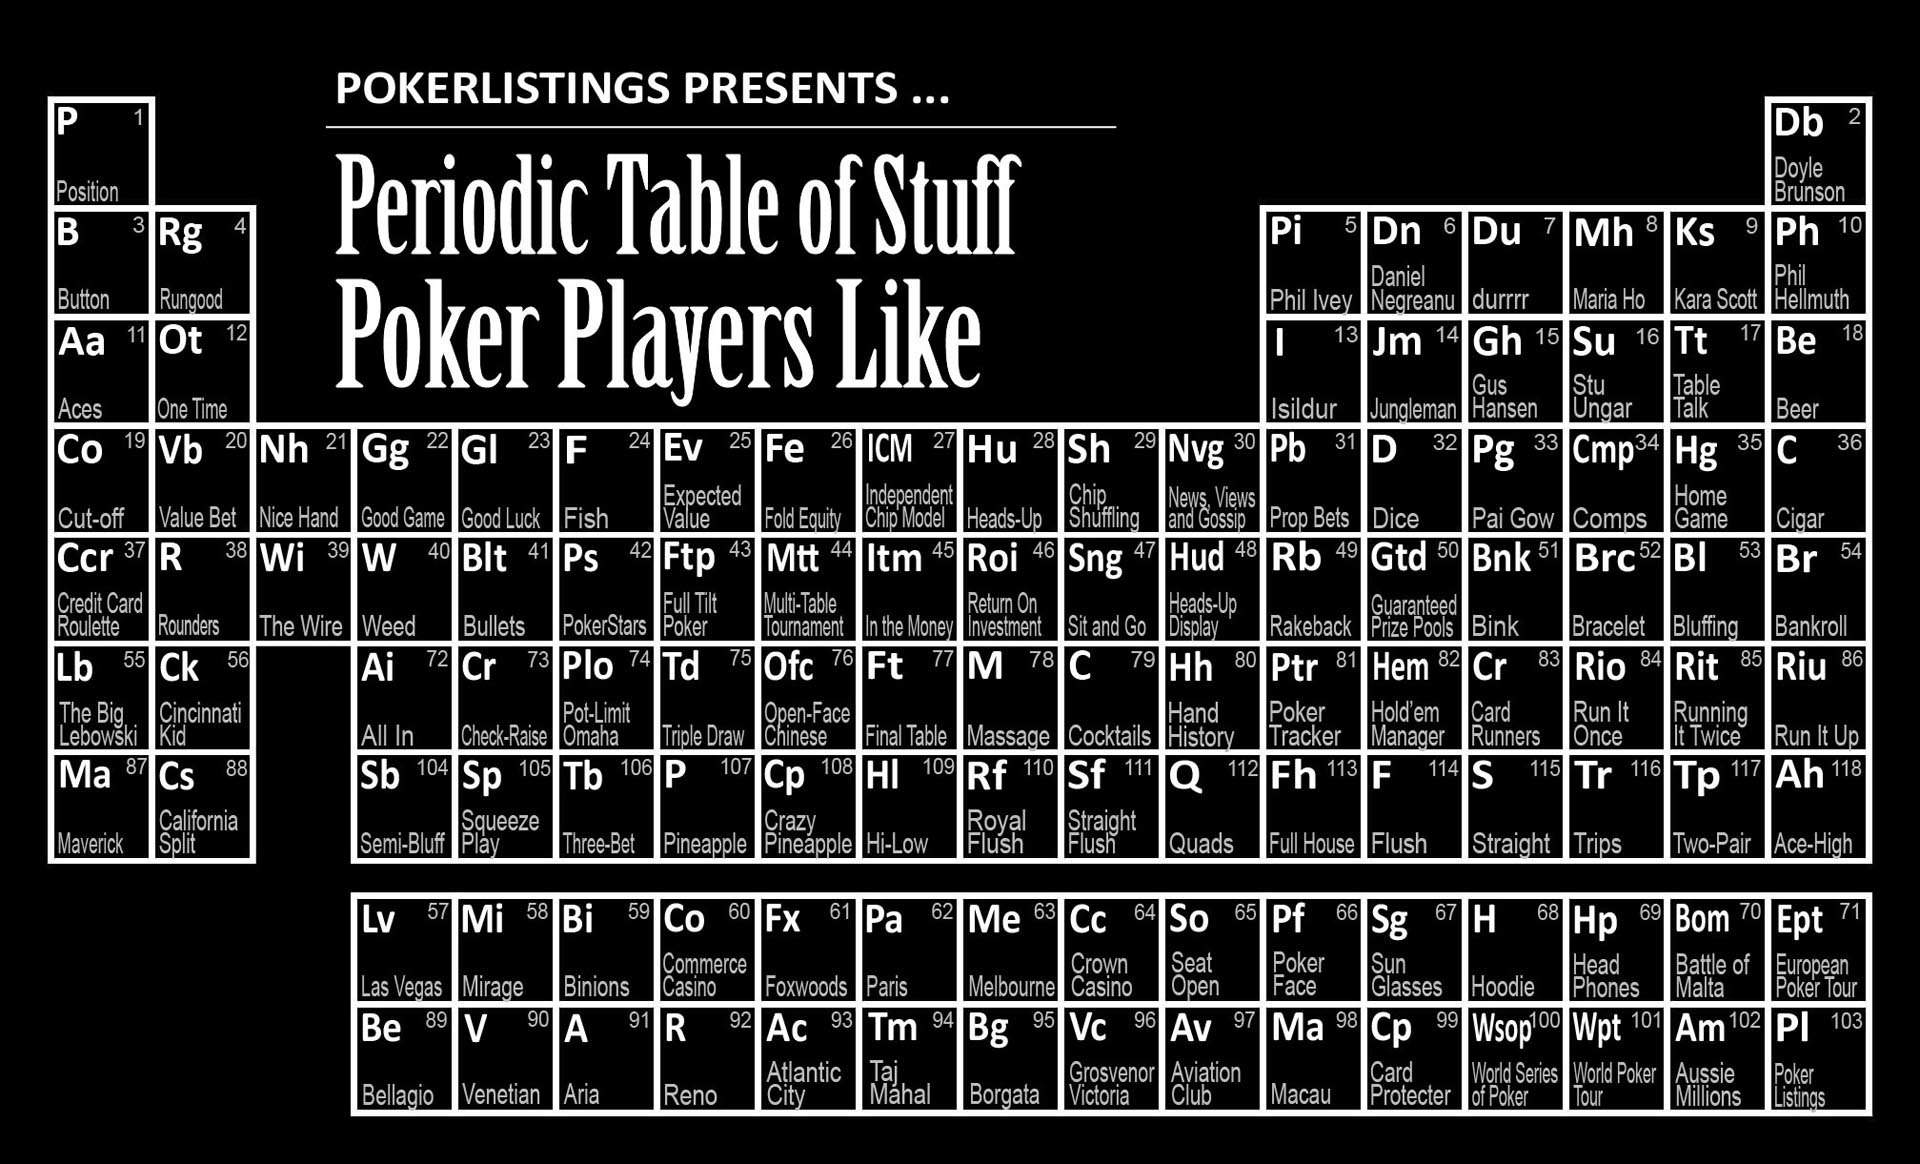 From sunglasses and hoodies to Rounders and credit card roulette, we painstakingly break down the many likes of the modern poker player 
http://www.pokerlistings.com/the-periodic-table-of-stuff-poker-players-like-infographic